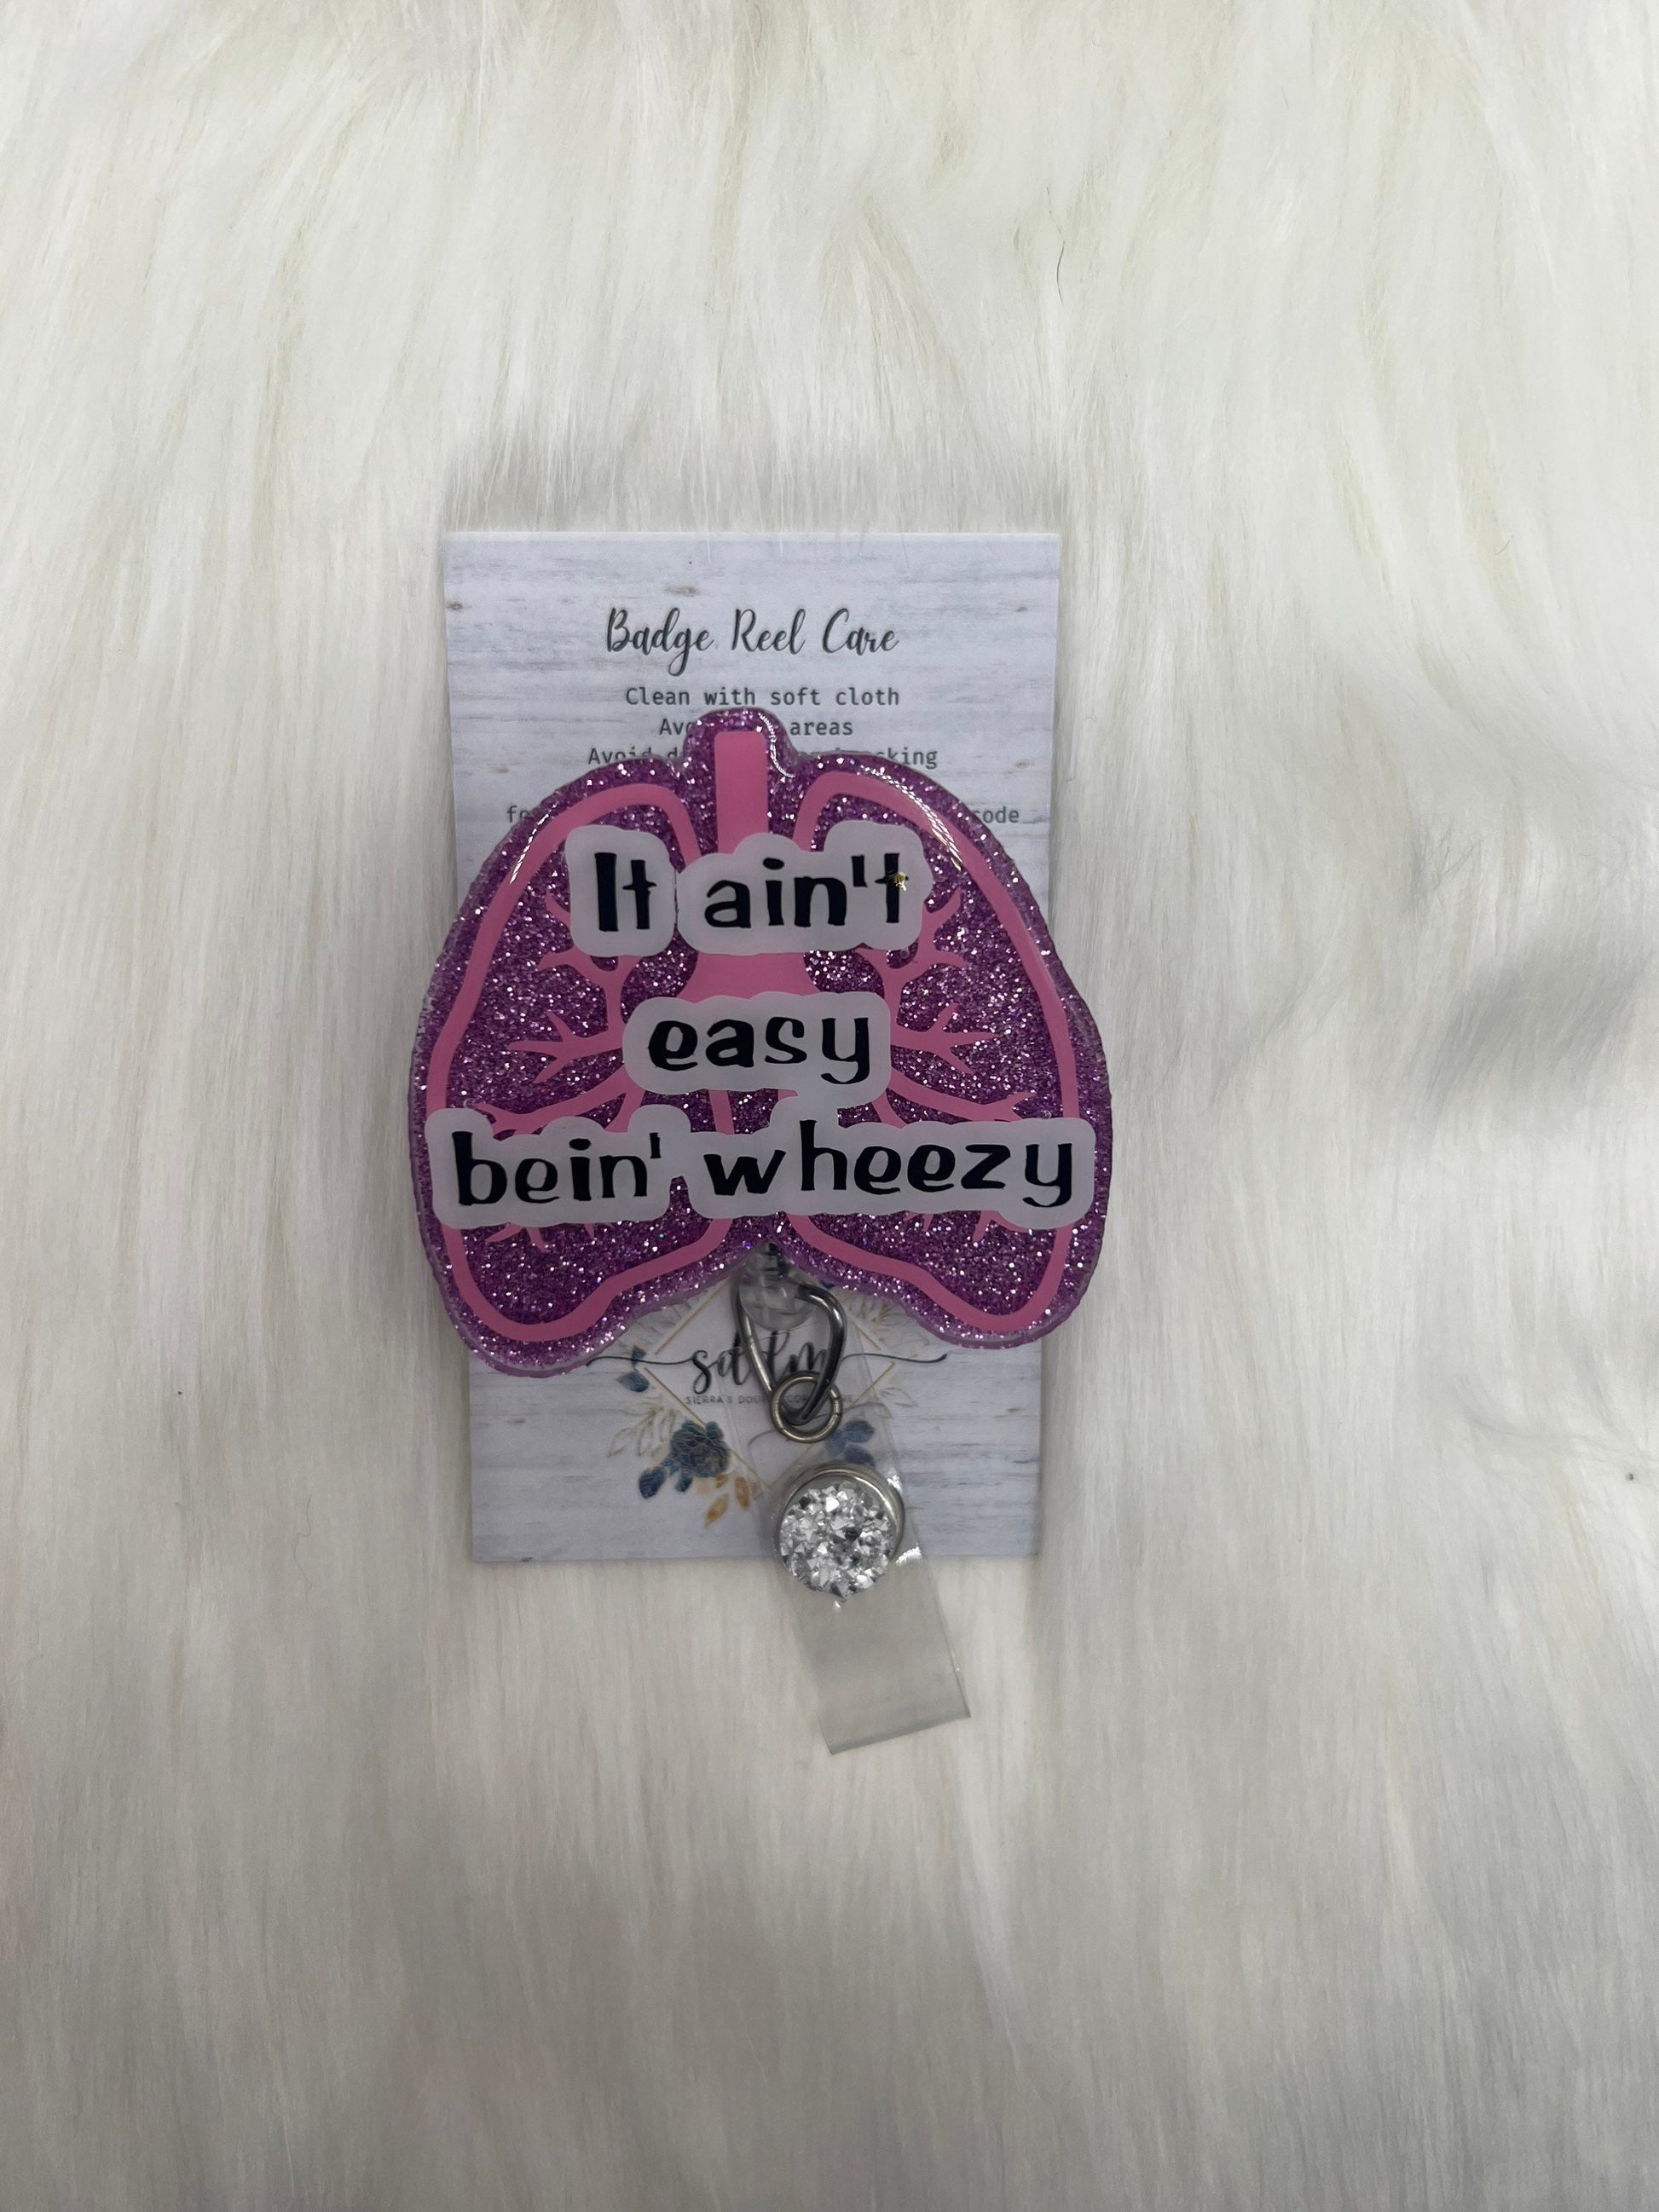 It ain’t easy bein wheezy badge reel- funny badge- nurse gifts- cna gifts- personalized gifts- mri safe- lanyard